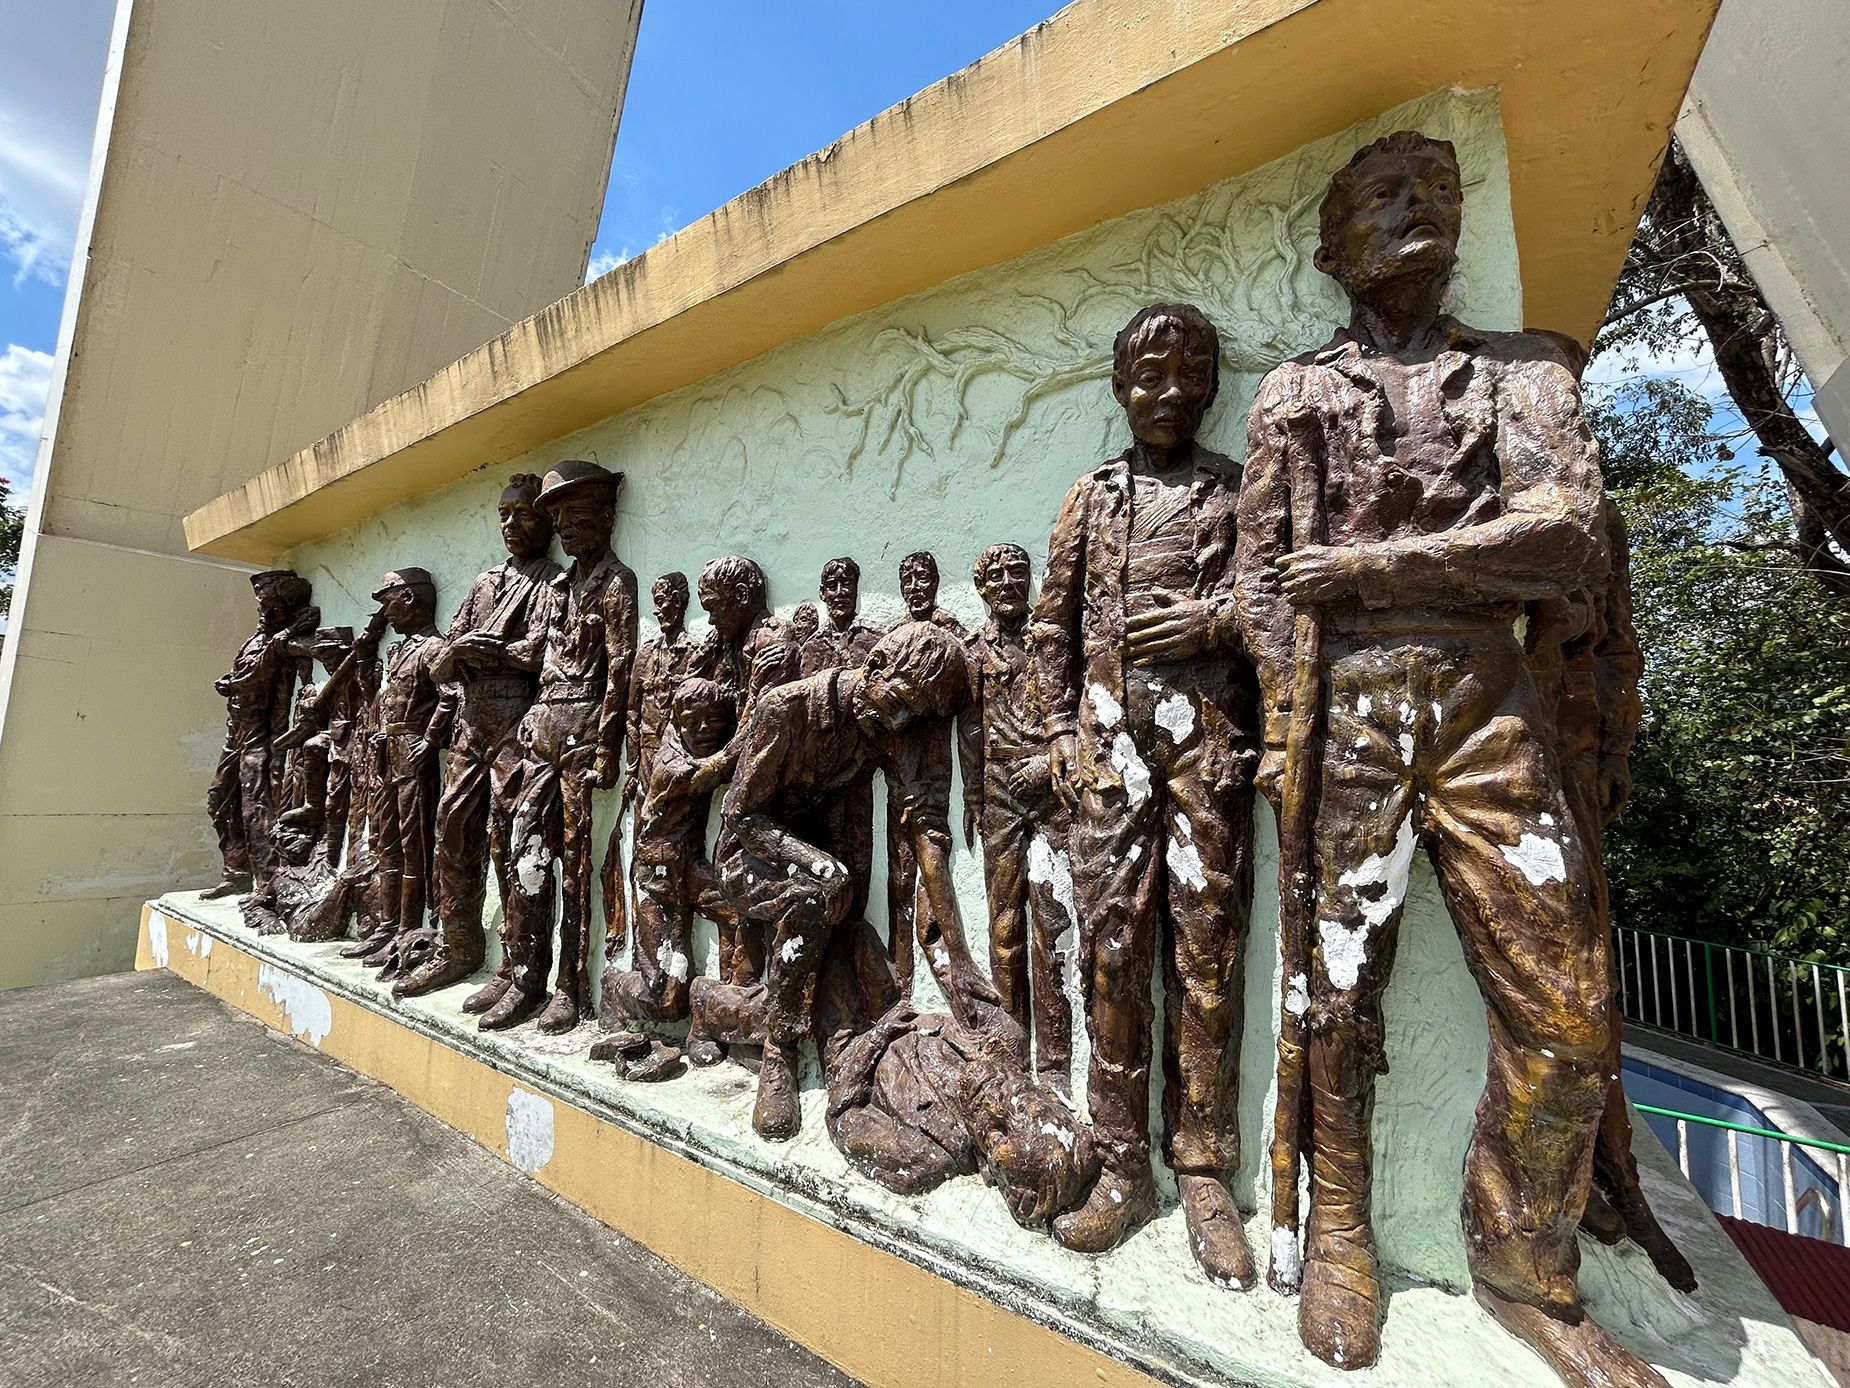 A relief depicts the 1942 Bataan Death March on the Death March Memorial in Capas, Philippines. Brad Lendon/CNN